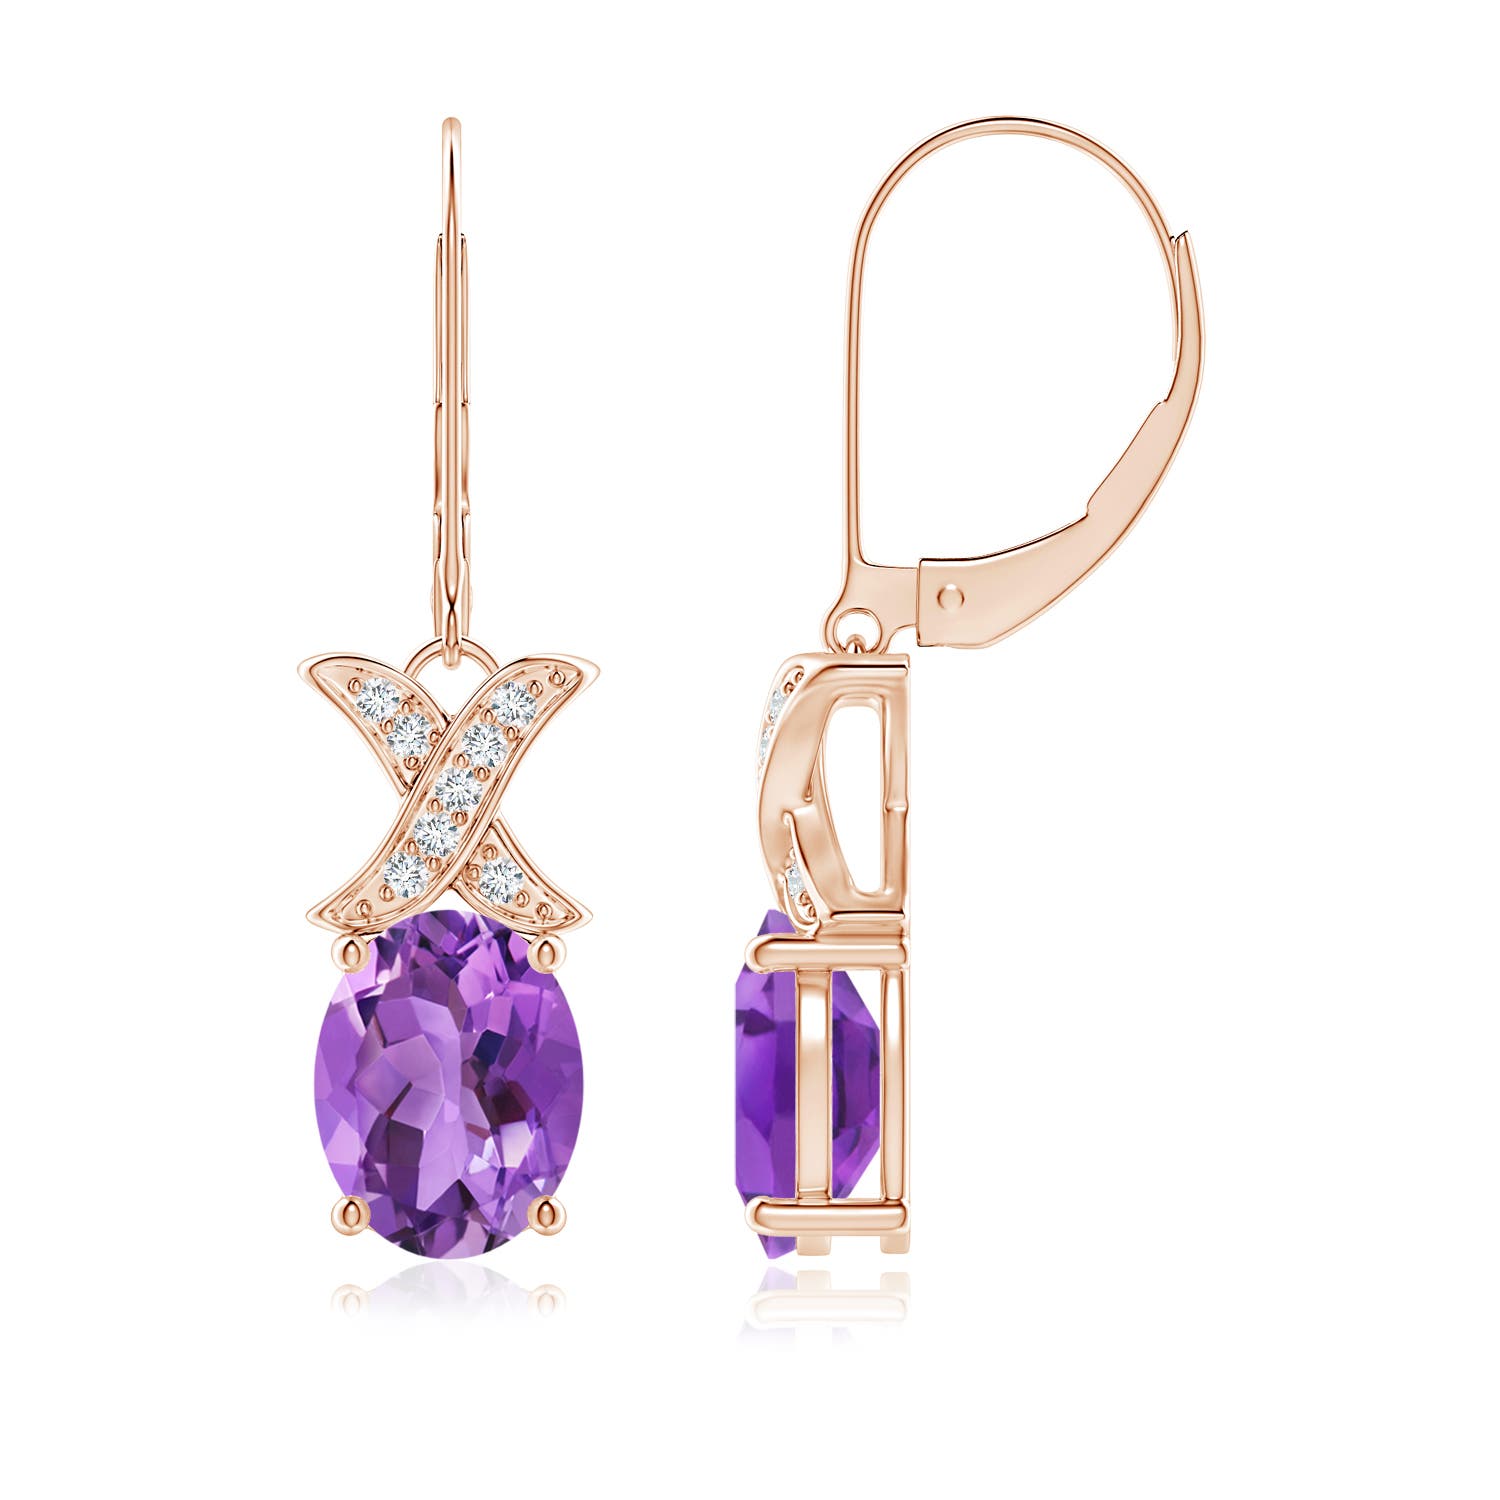 AA - Amethyst / 3.3 CT / 14 KT Rose Gold